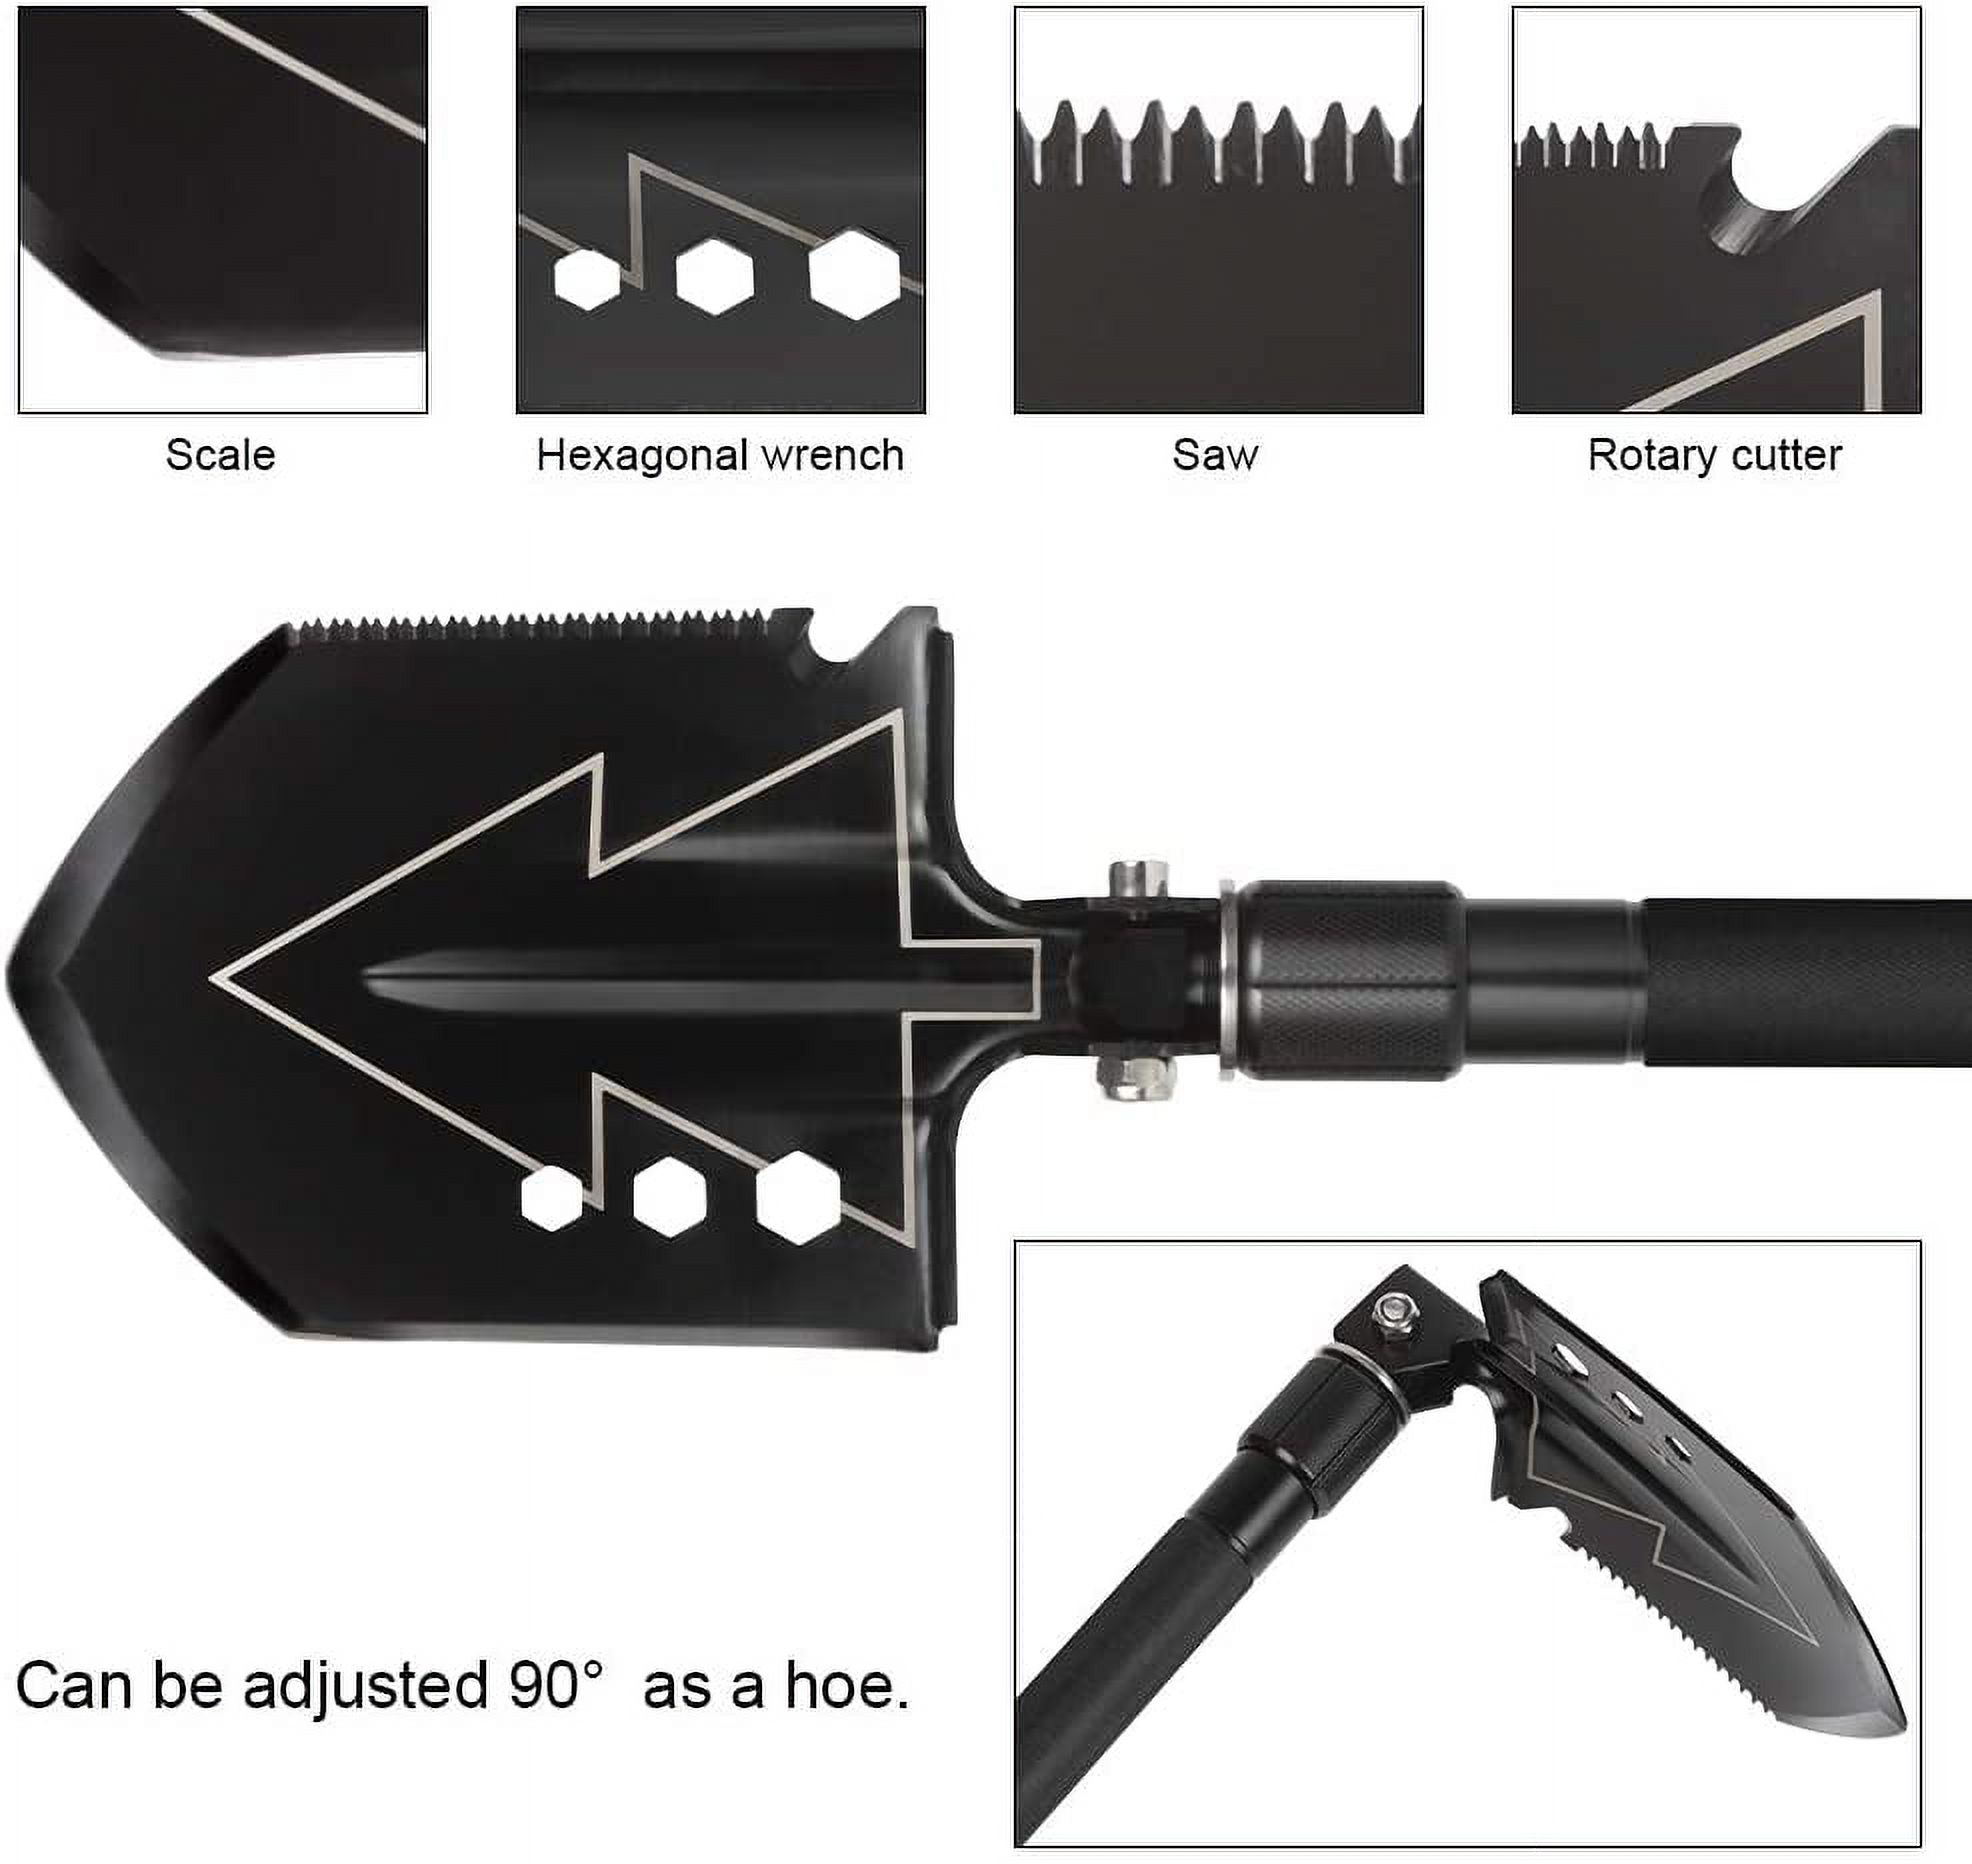 LIANTRAL Camping Shovel Axe Set- Folding Portable Multi Tool Survival Kits with Tactical Waist Pack, Camping Axe Military Shovel Black - image 4 of 7